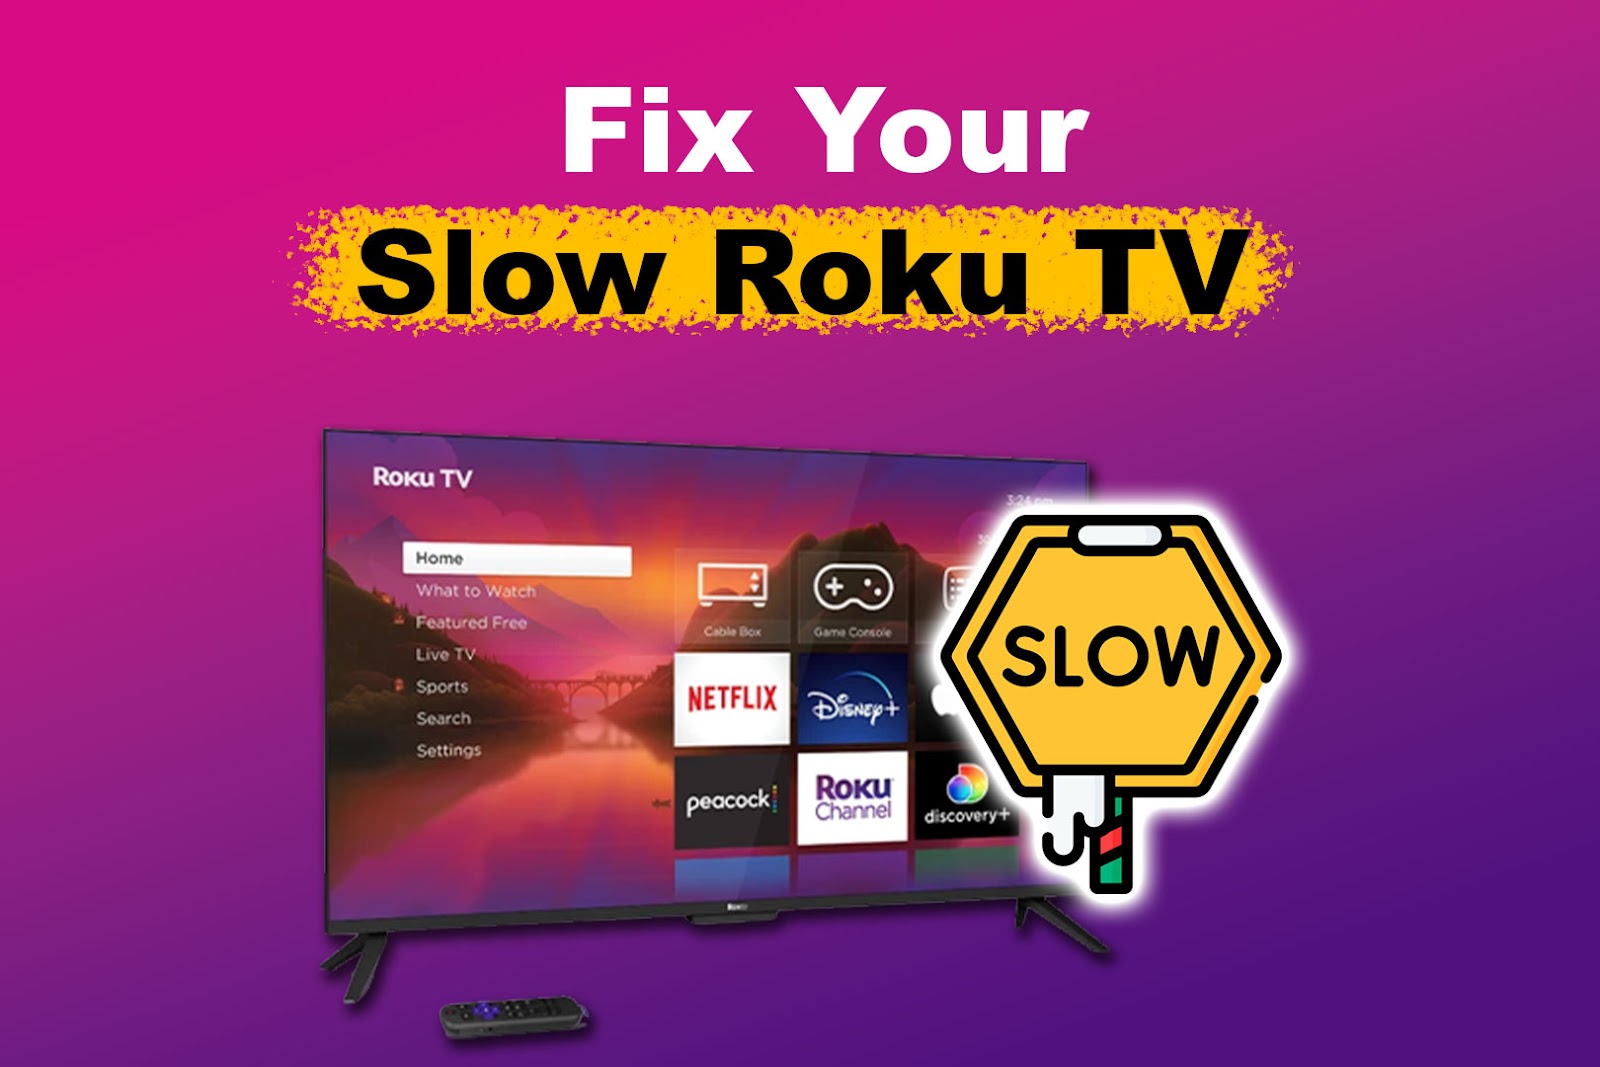 Why Is Your Roku TV So Slow